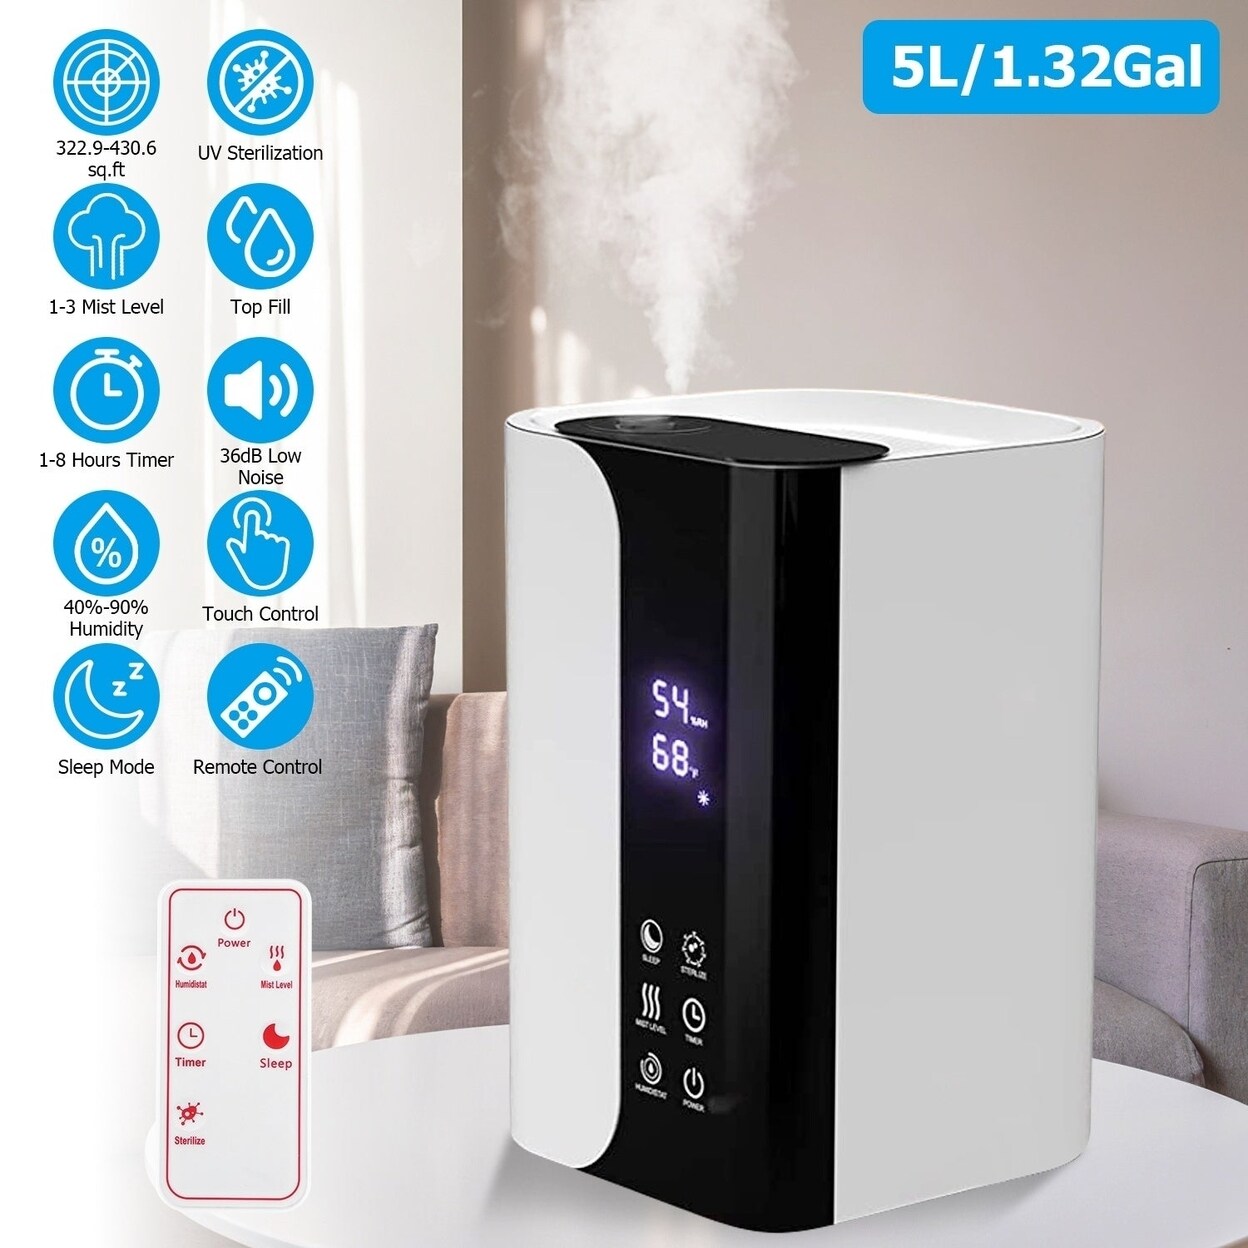 SKUSHOPS 5L Humidifiers Top Fill Cool Mist Humidifier with Essential Oils Diffuser Filter Rotatable Outlet Nozzle Timer 1 to 3